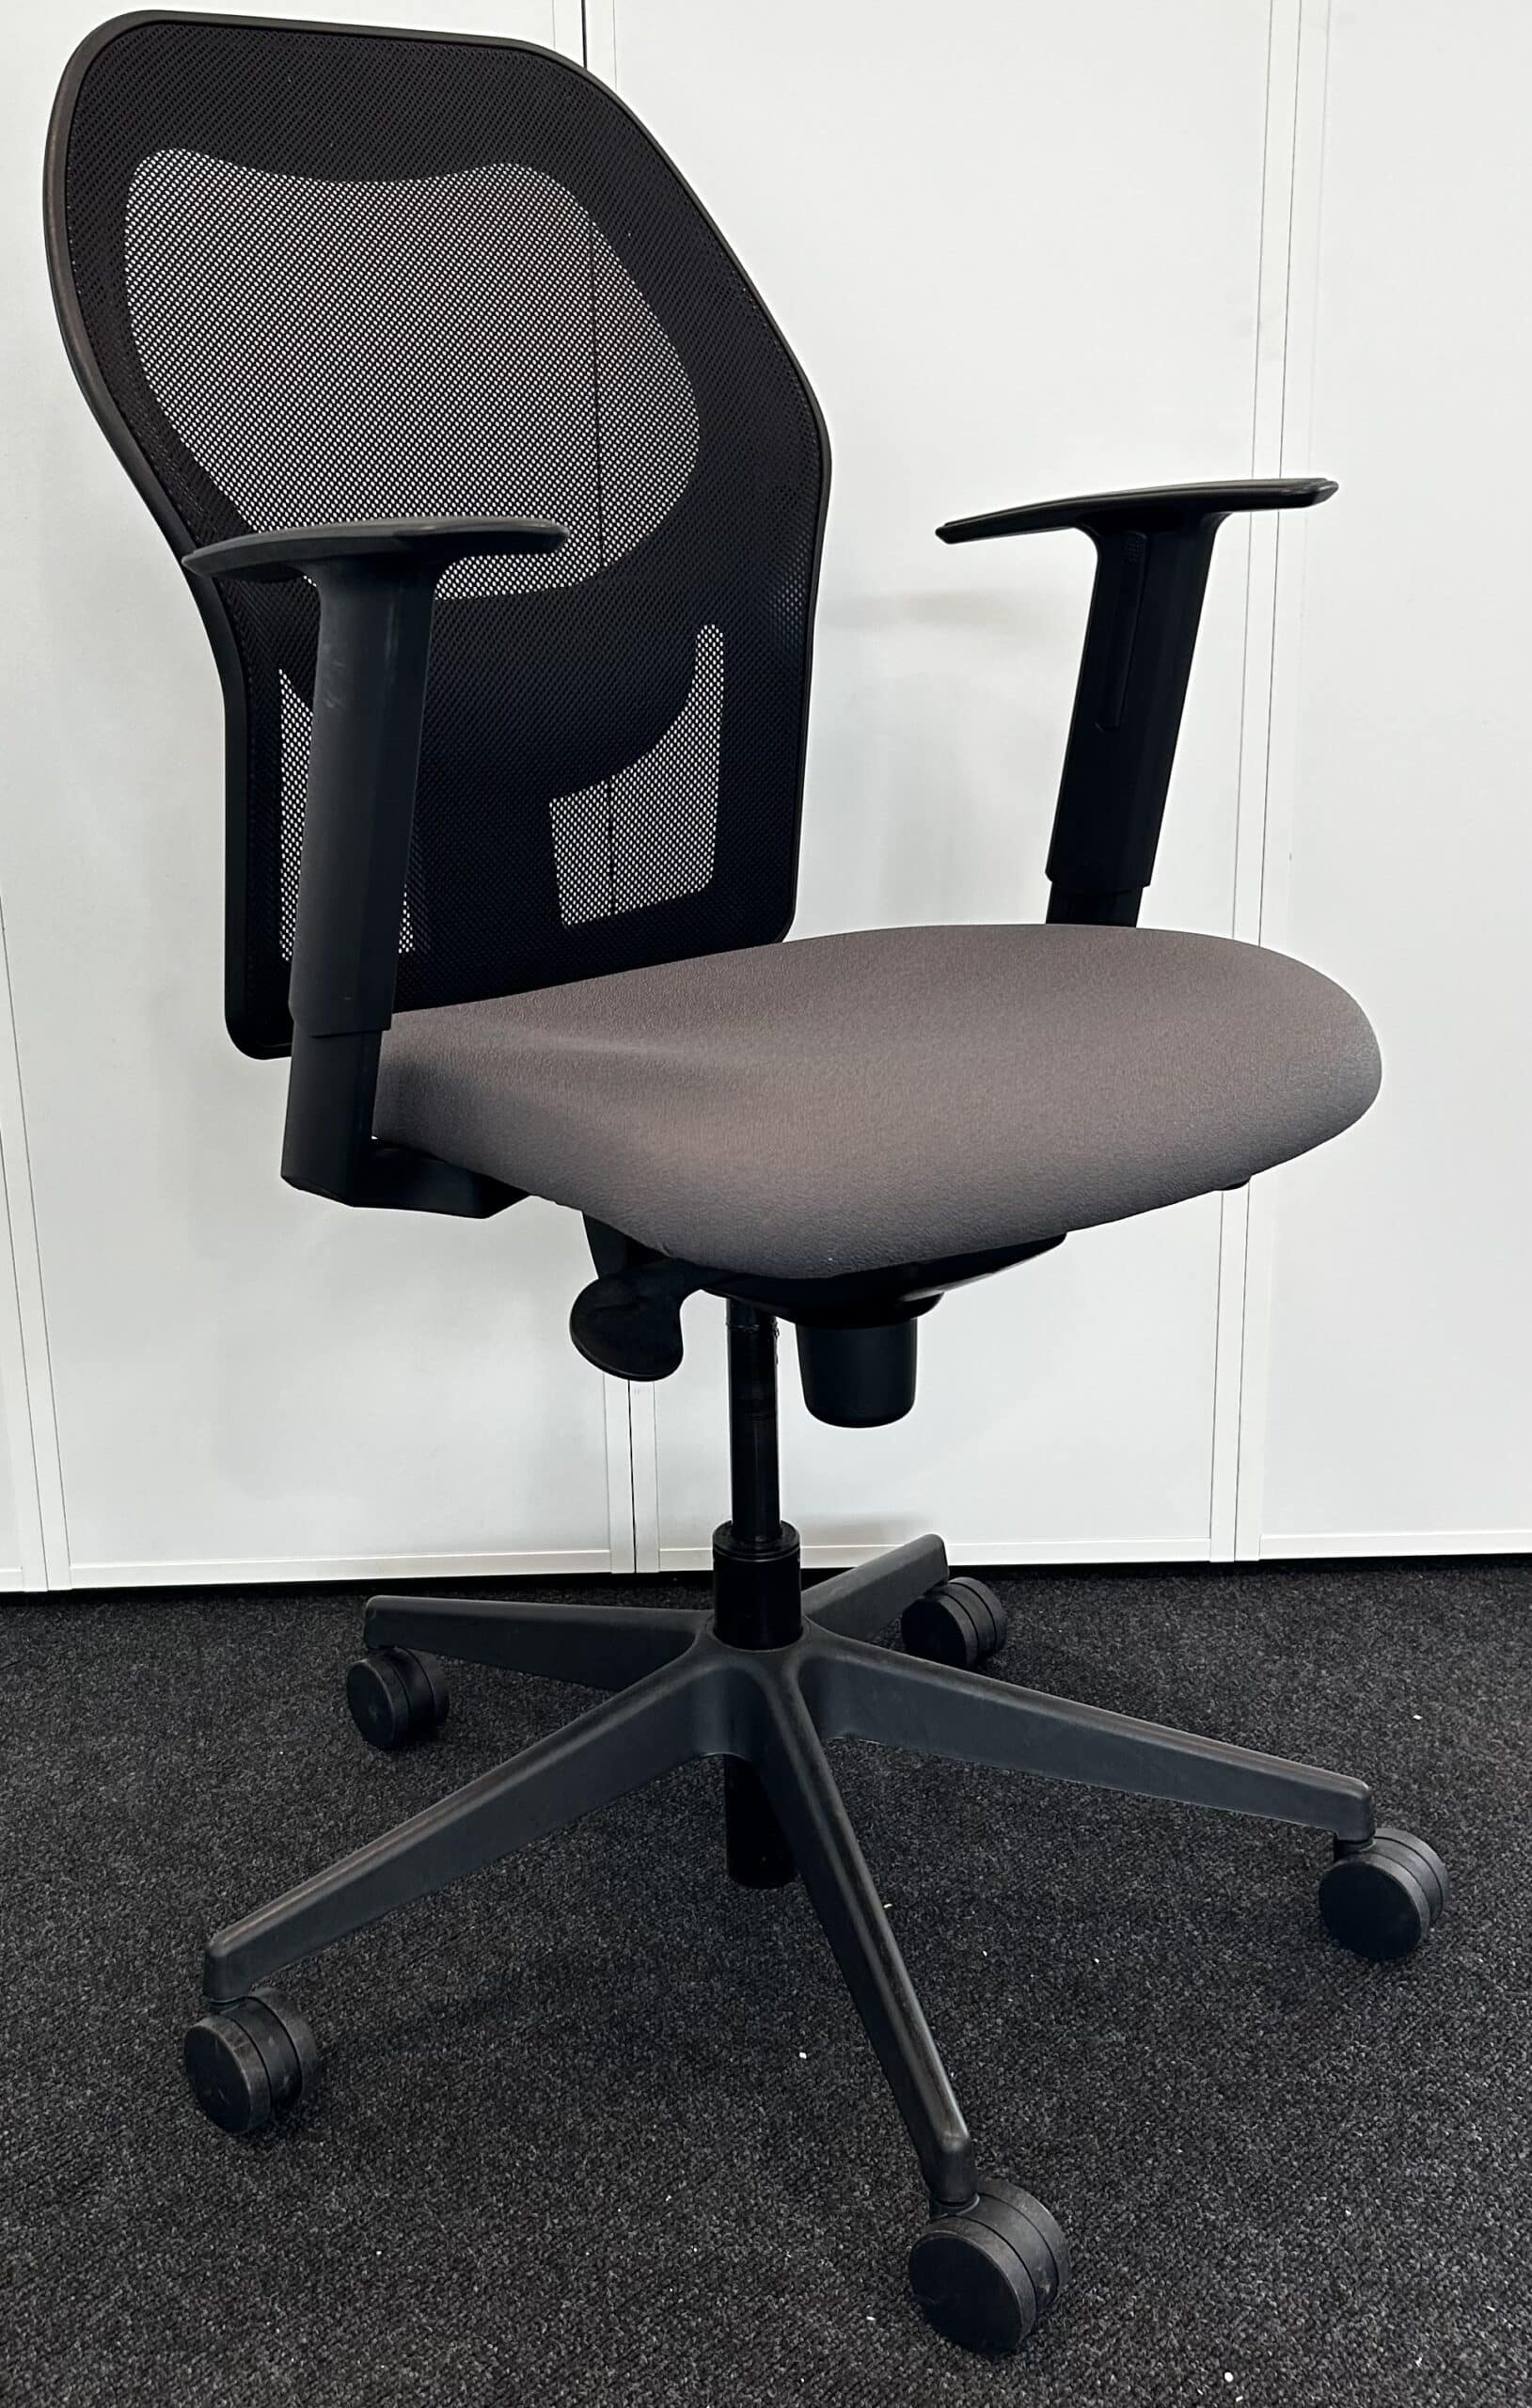 Verco Mesh MSH 1AA with Height Adjustable Arms Blizzard grey Seat and Black Mesh Back with Lumbar Bar